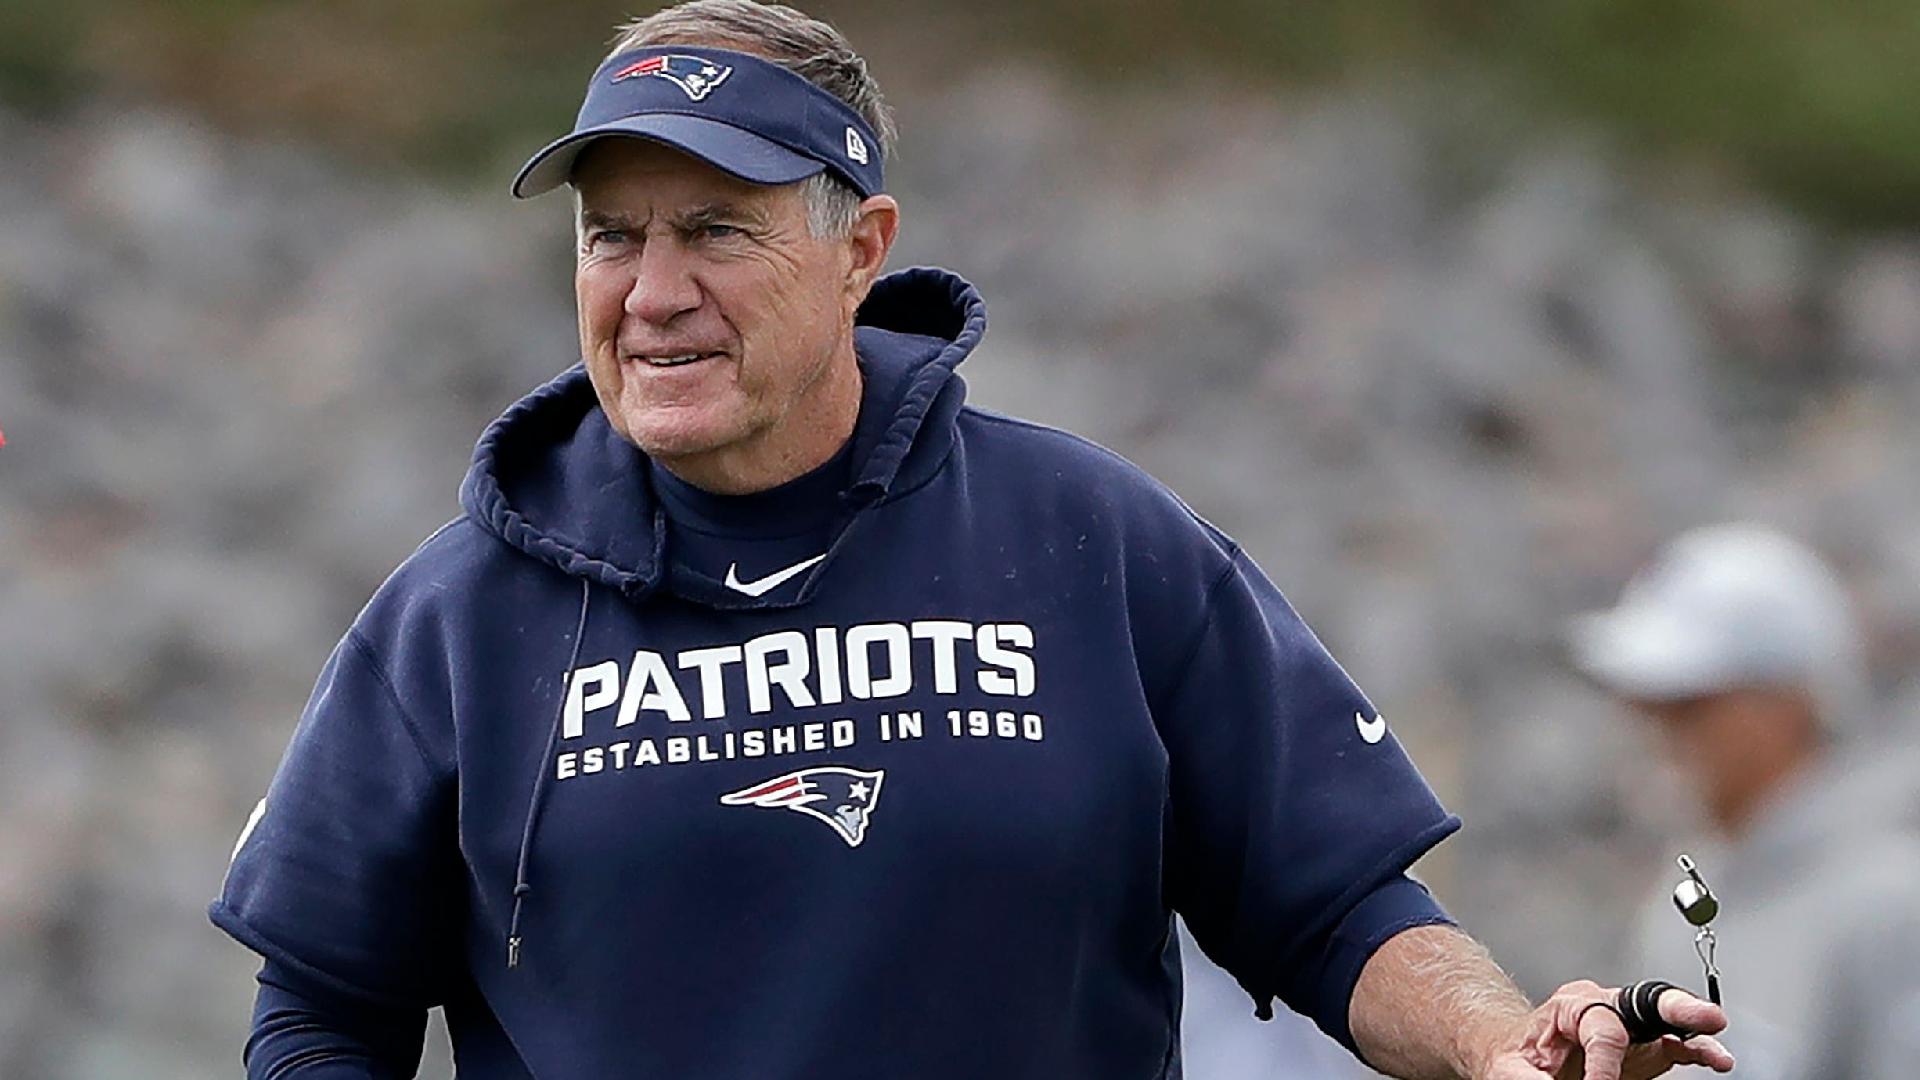 NFL coaching great Bill Belichick leaves New England Patriots after 24 years